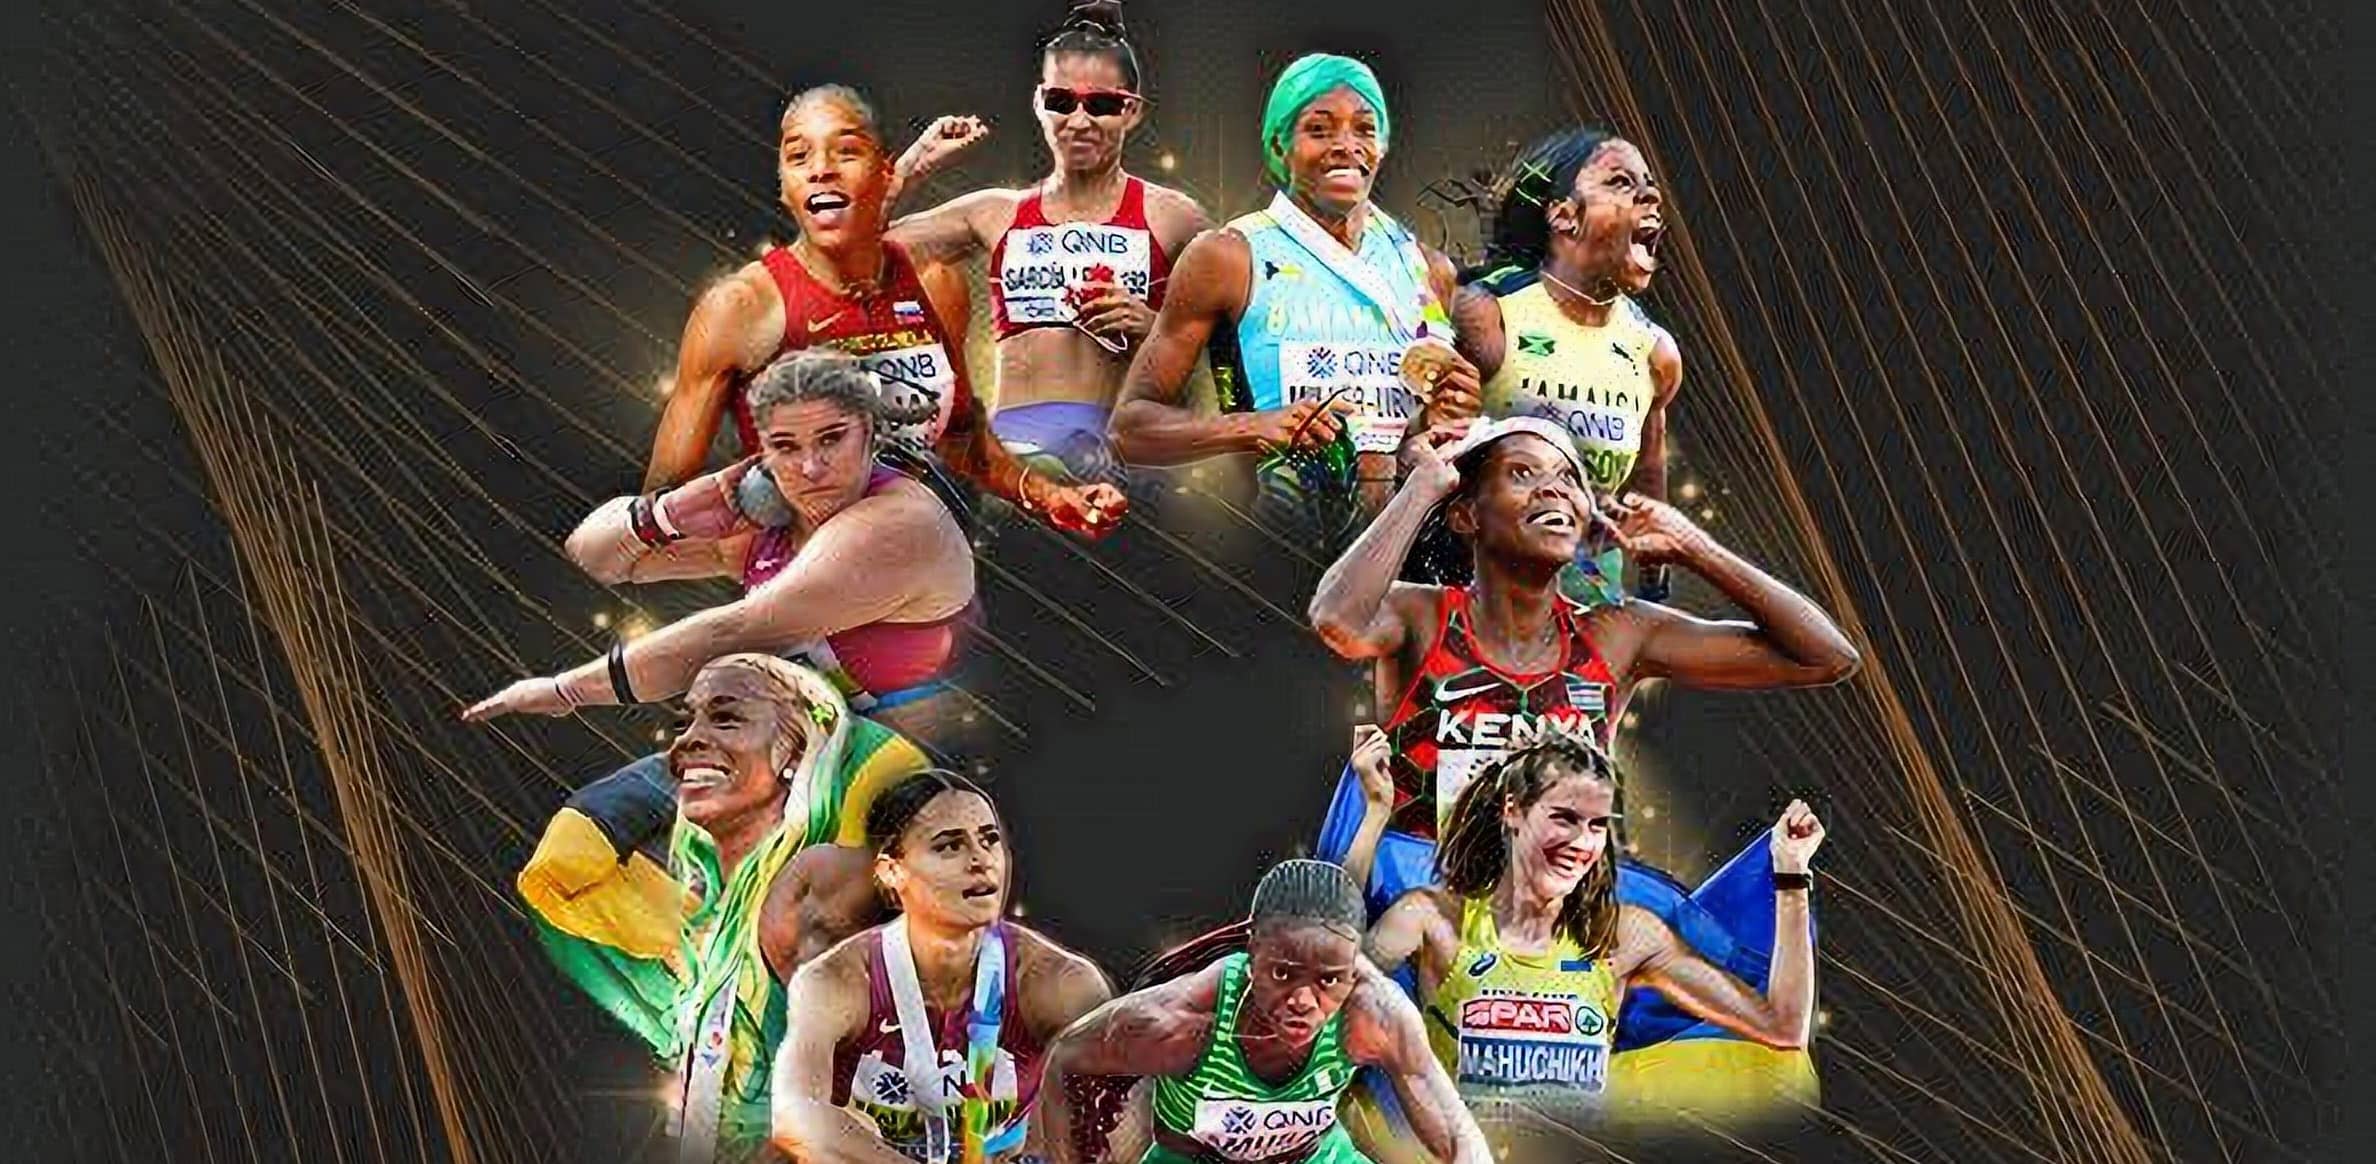 Nominees announced for women’s world athlete of the year 2022